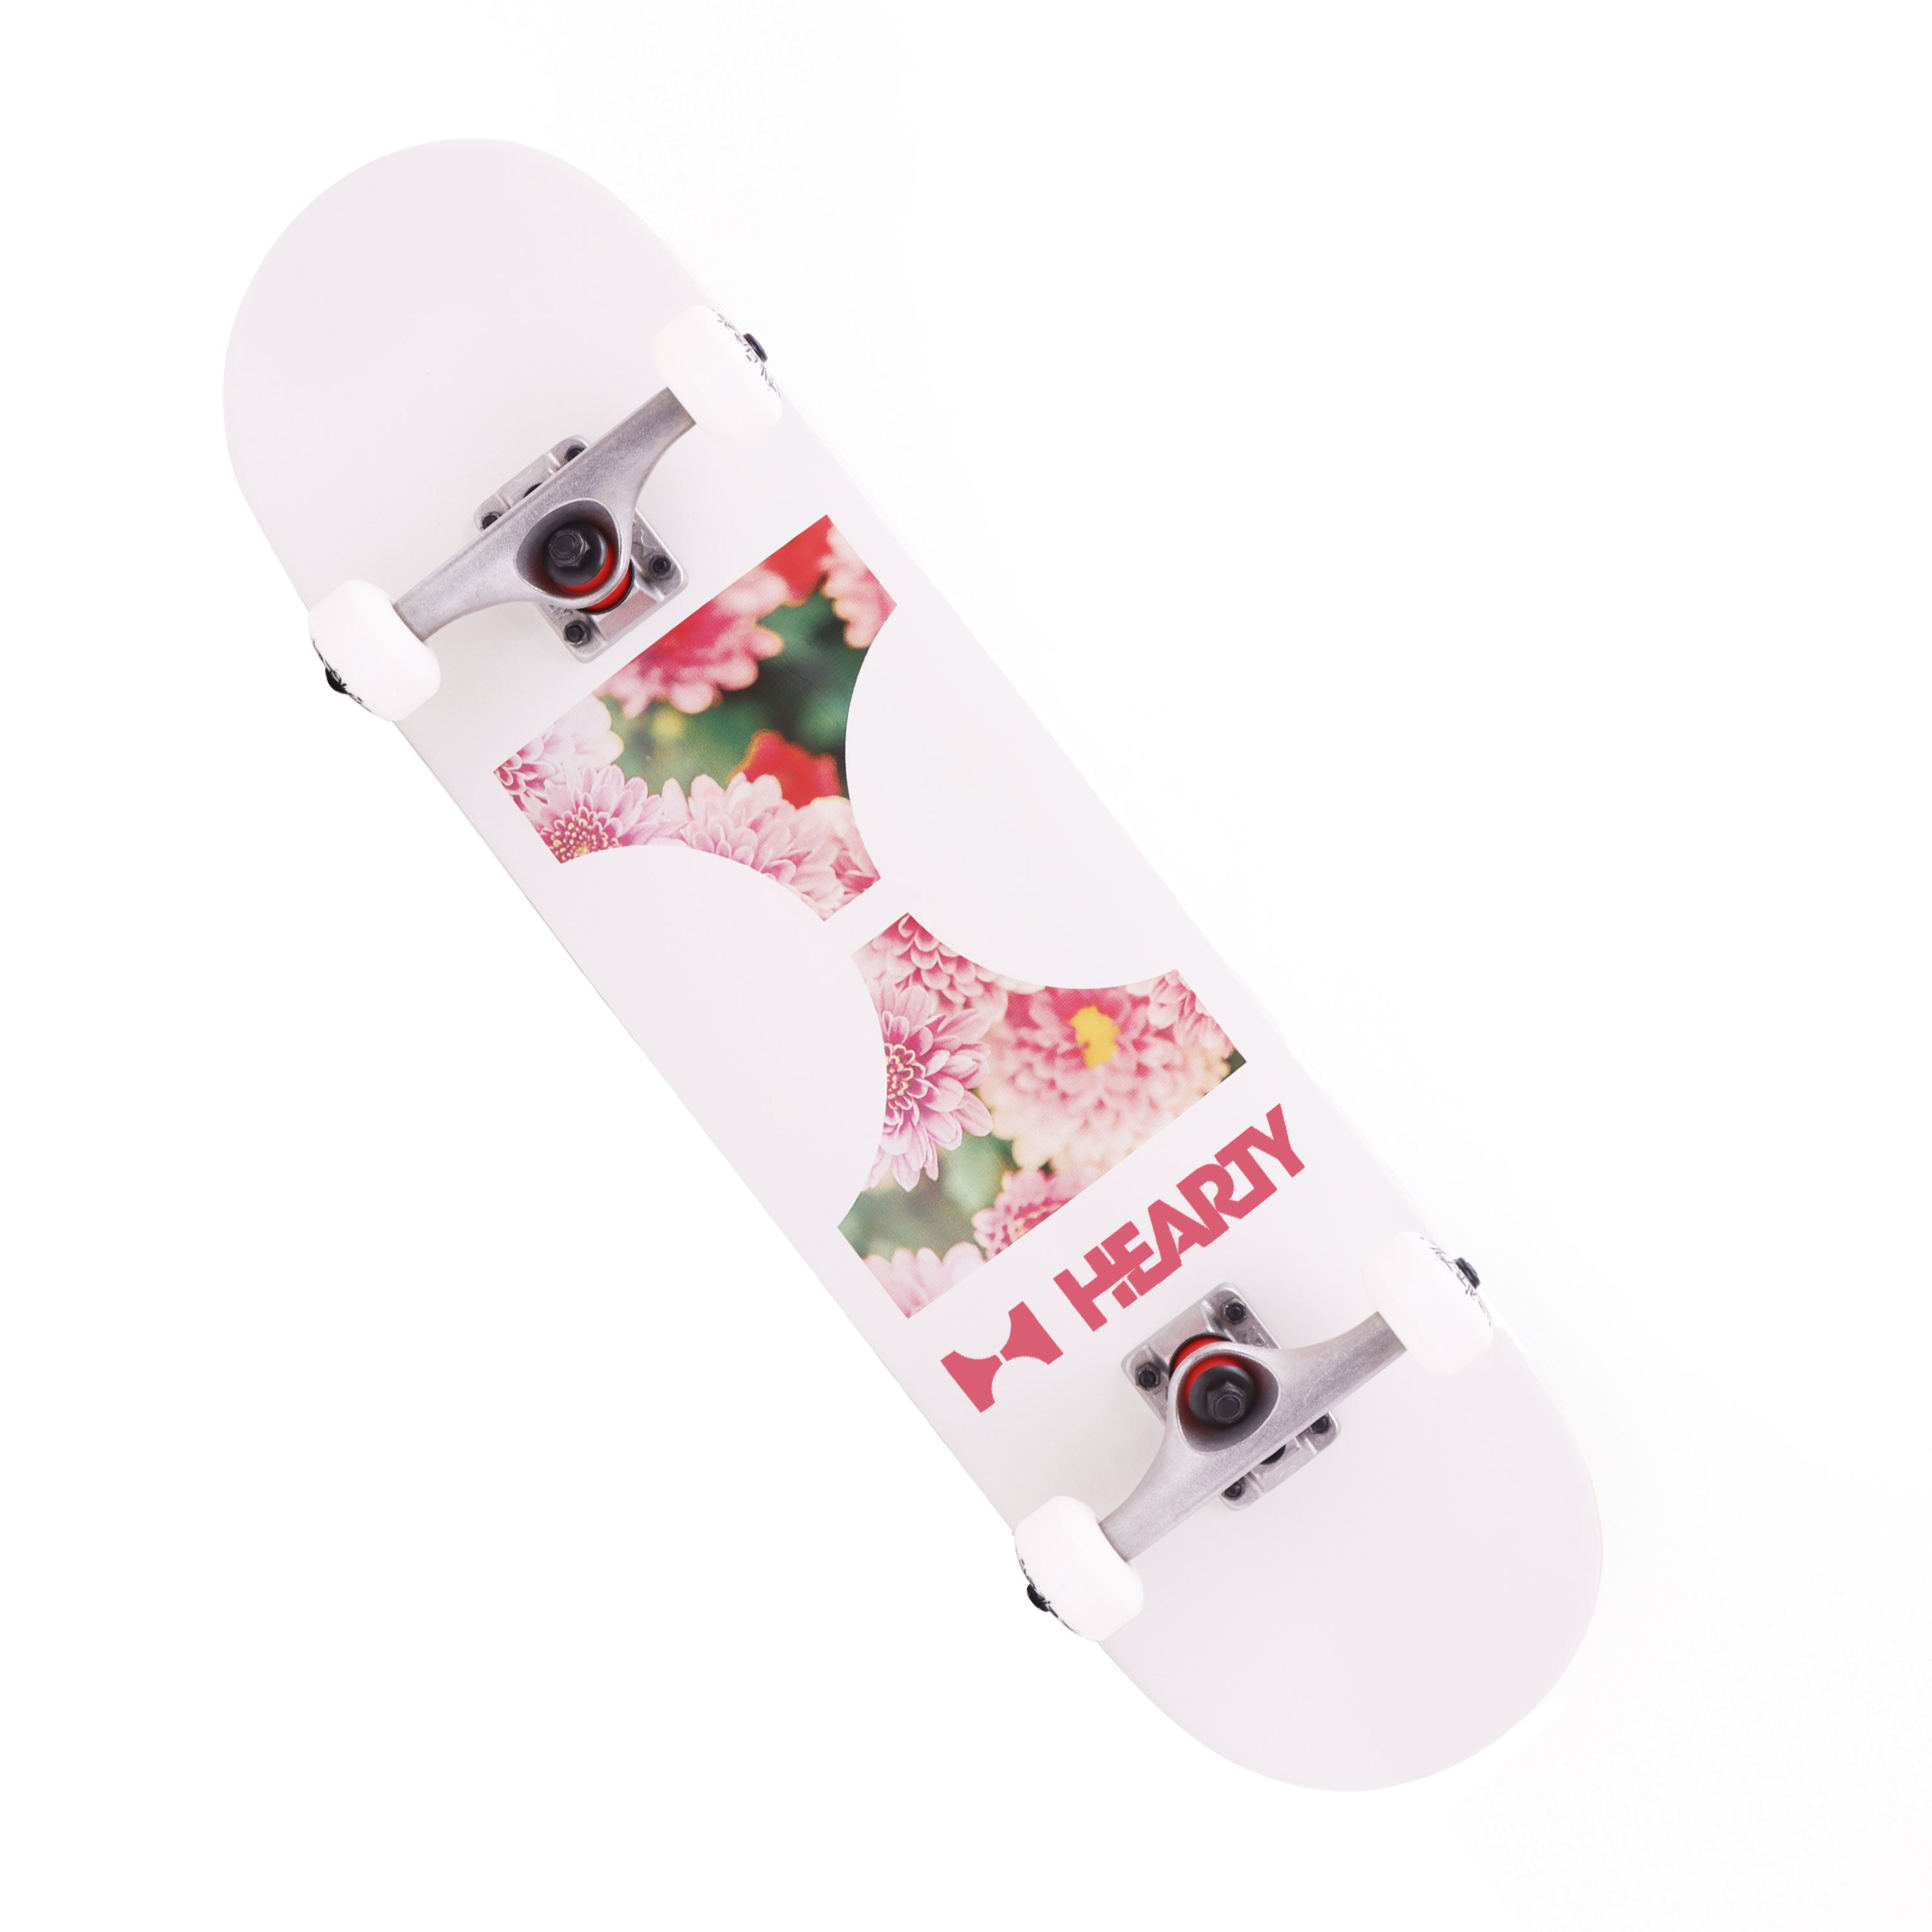 Hearty Skateboards Floral Cream 7.375" To 8.25"